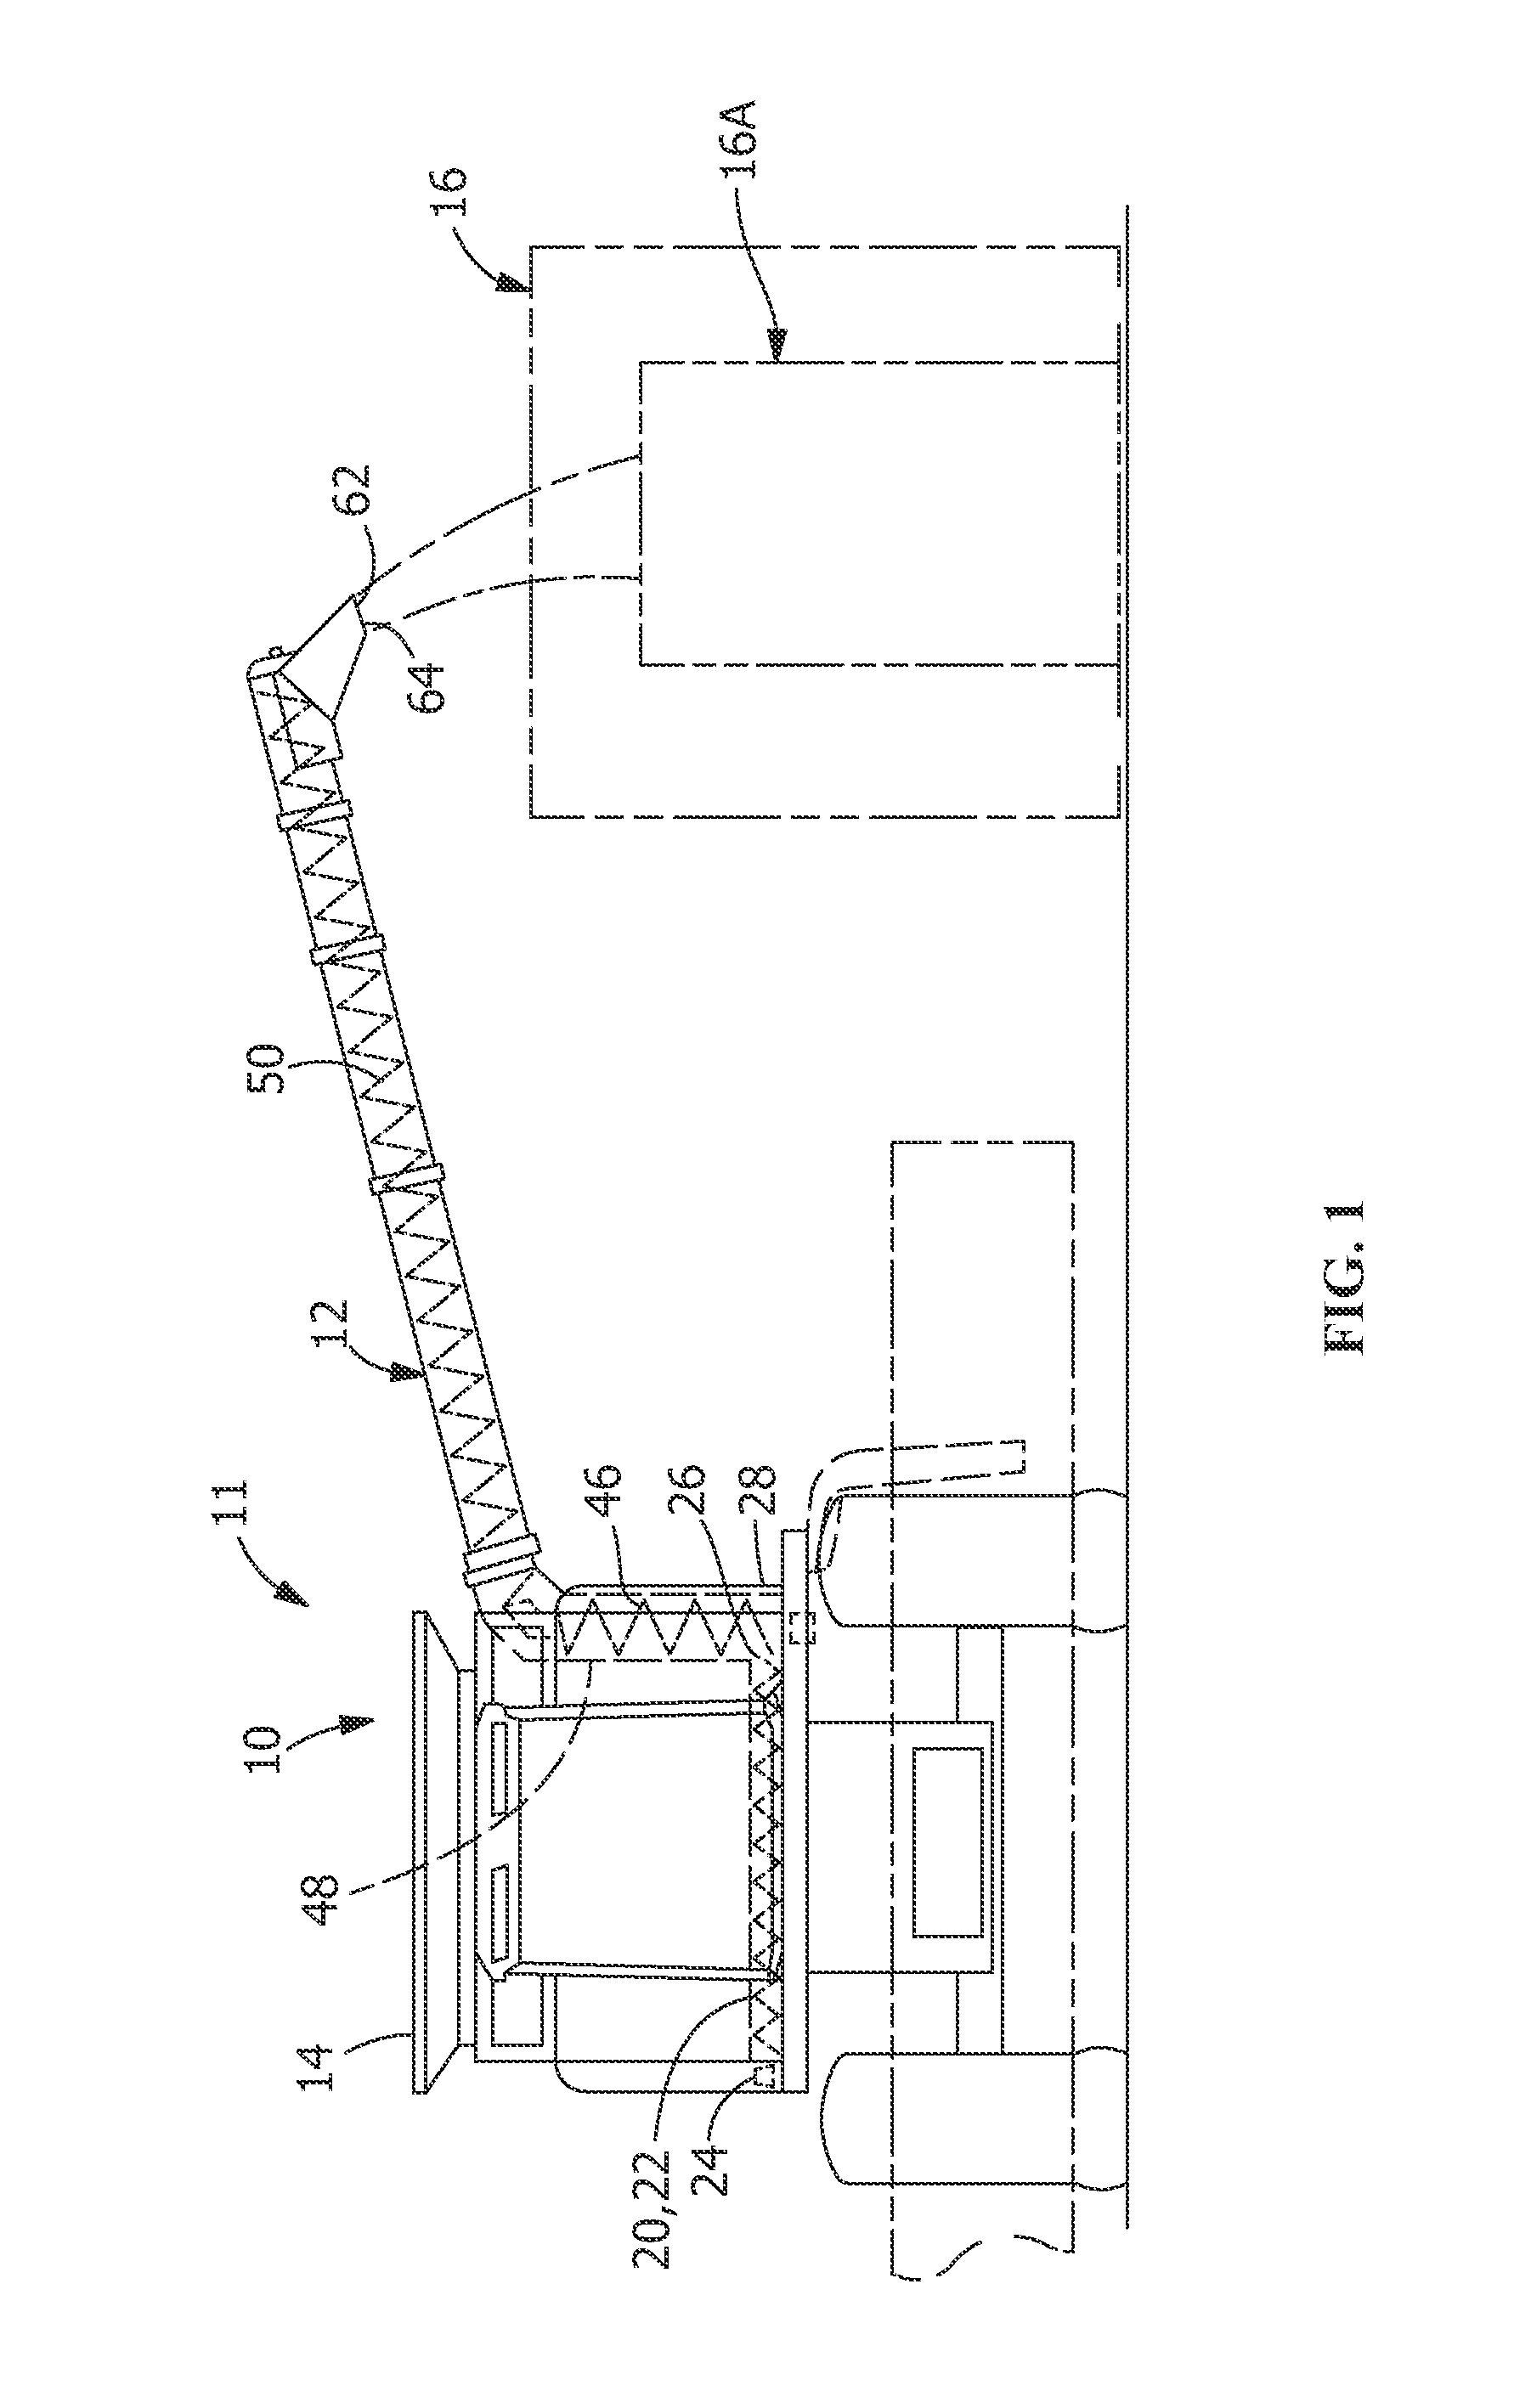 Method of controlling a conveyance rate of grain of an unloader system